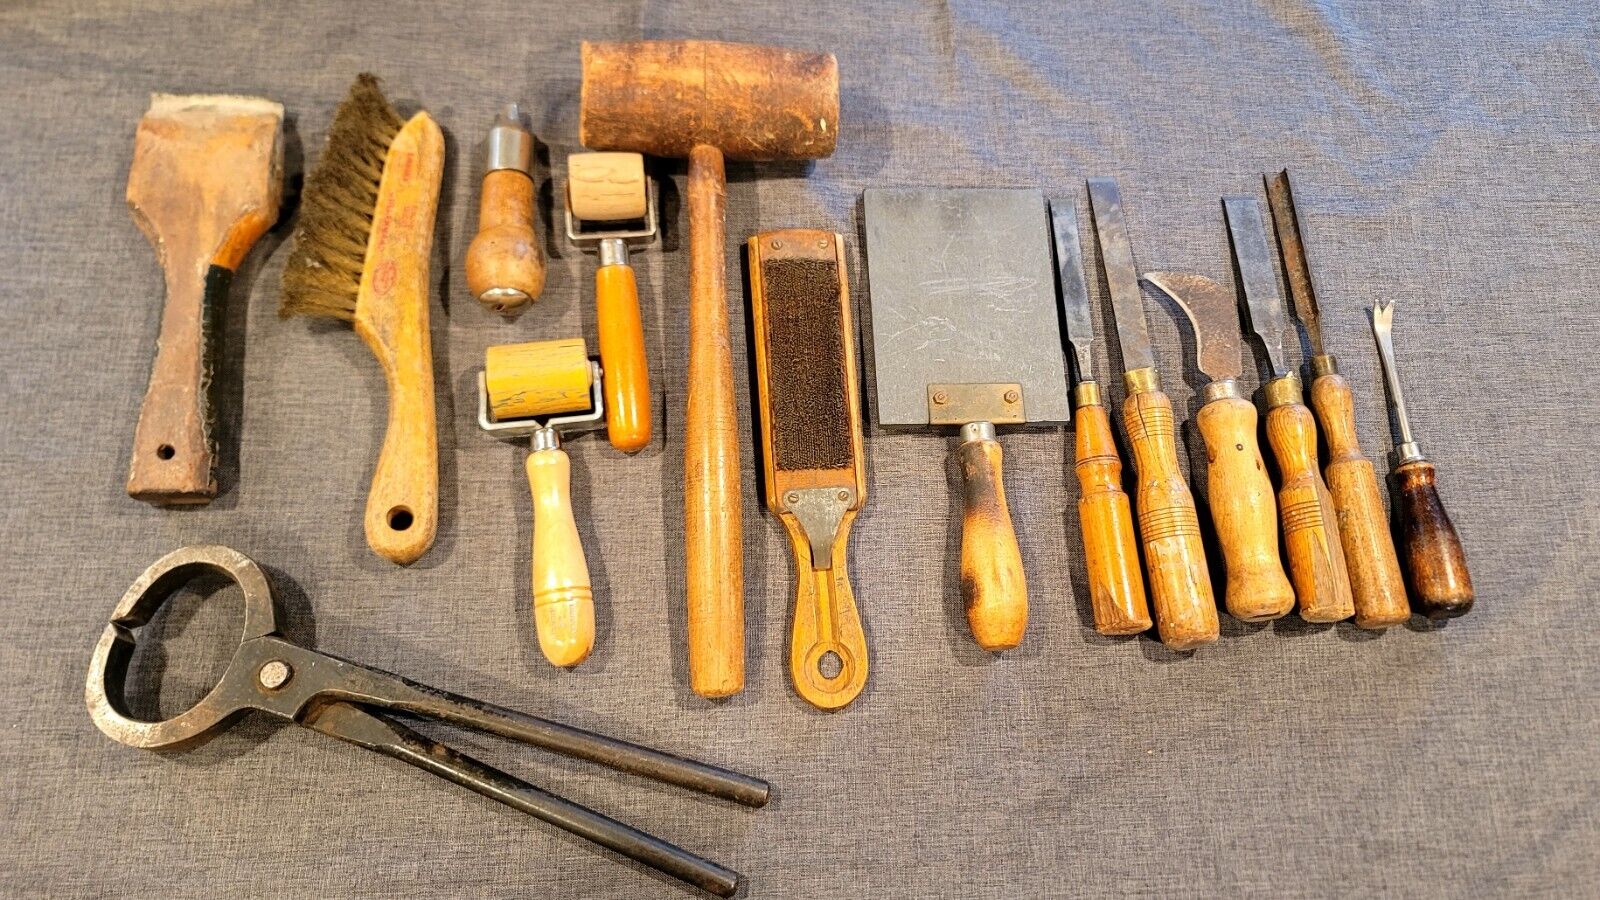 Lot of Vintage Woodworking tools-chisels, mallet, pullers, rollers